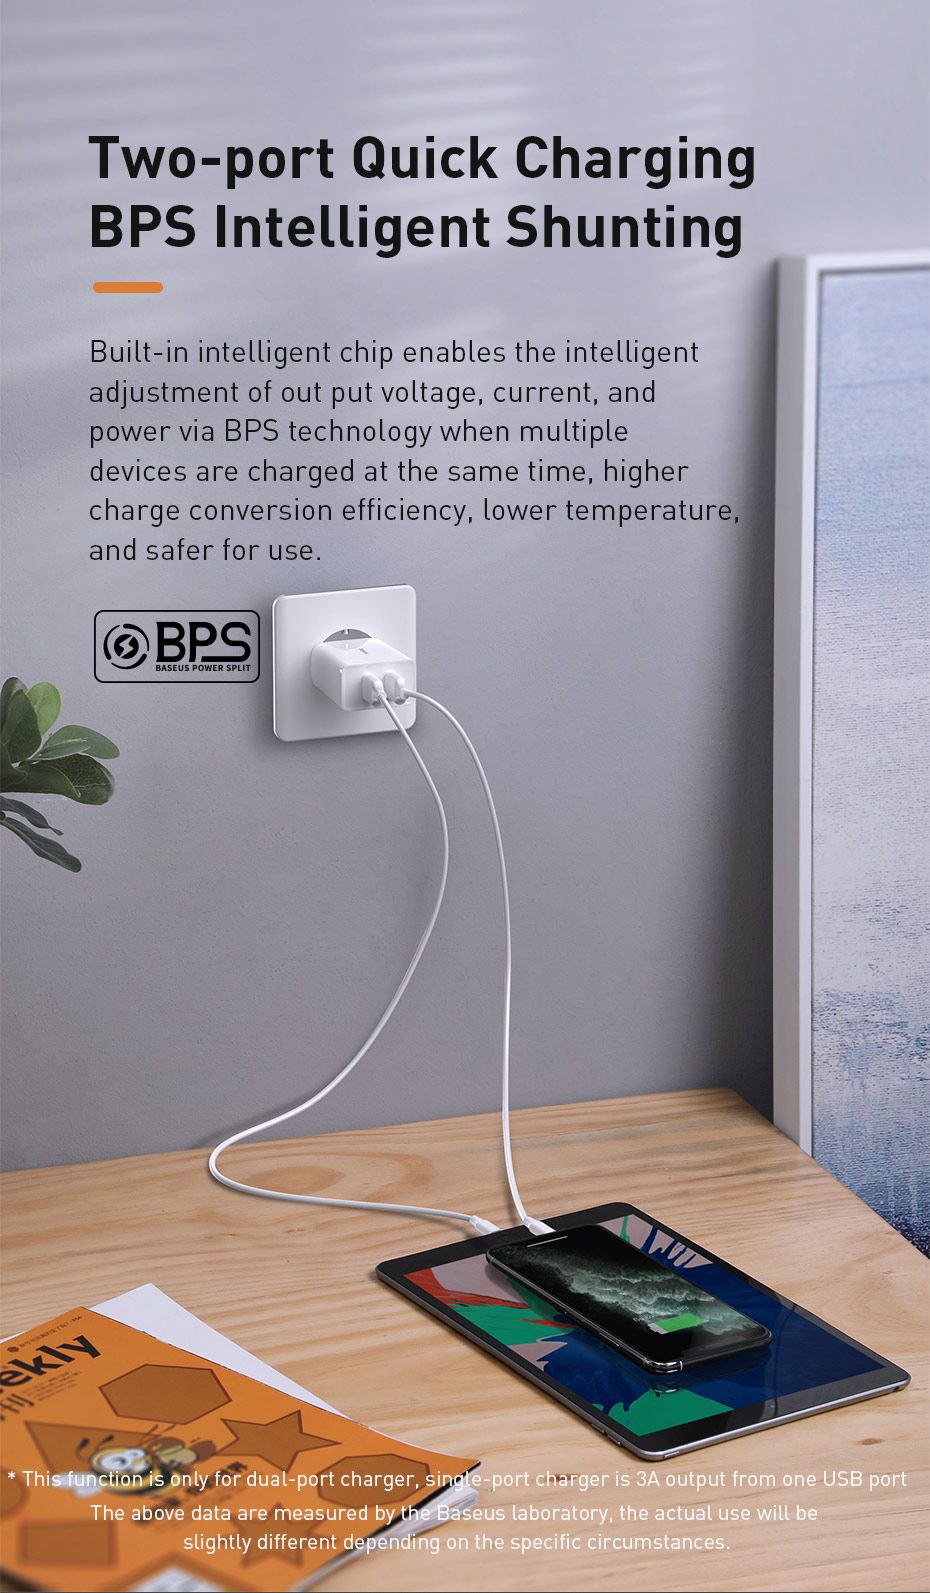 Baseus-18W-PD30-USB-C-Wall-Charger-FCP-AFC-Quick-Charge-EU-Plug-Type-C-Phone-Charger-For-Smart-Phone-1695468